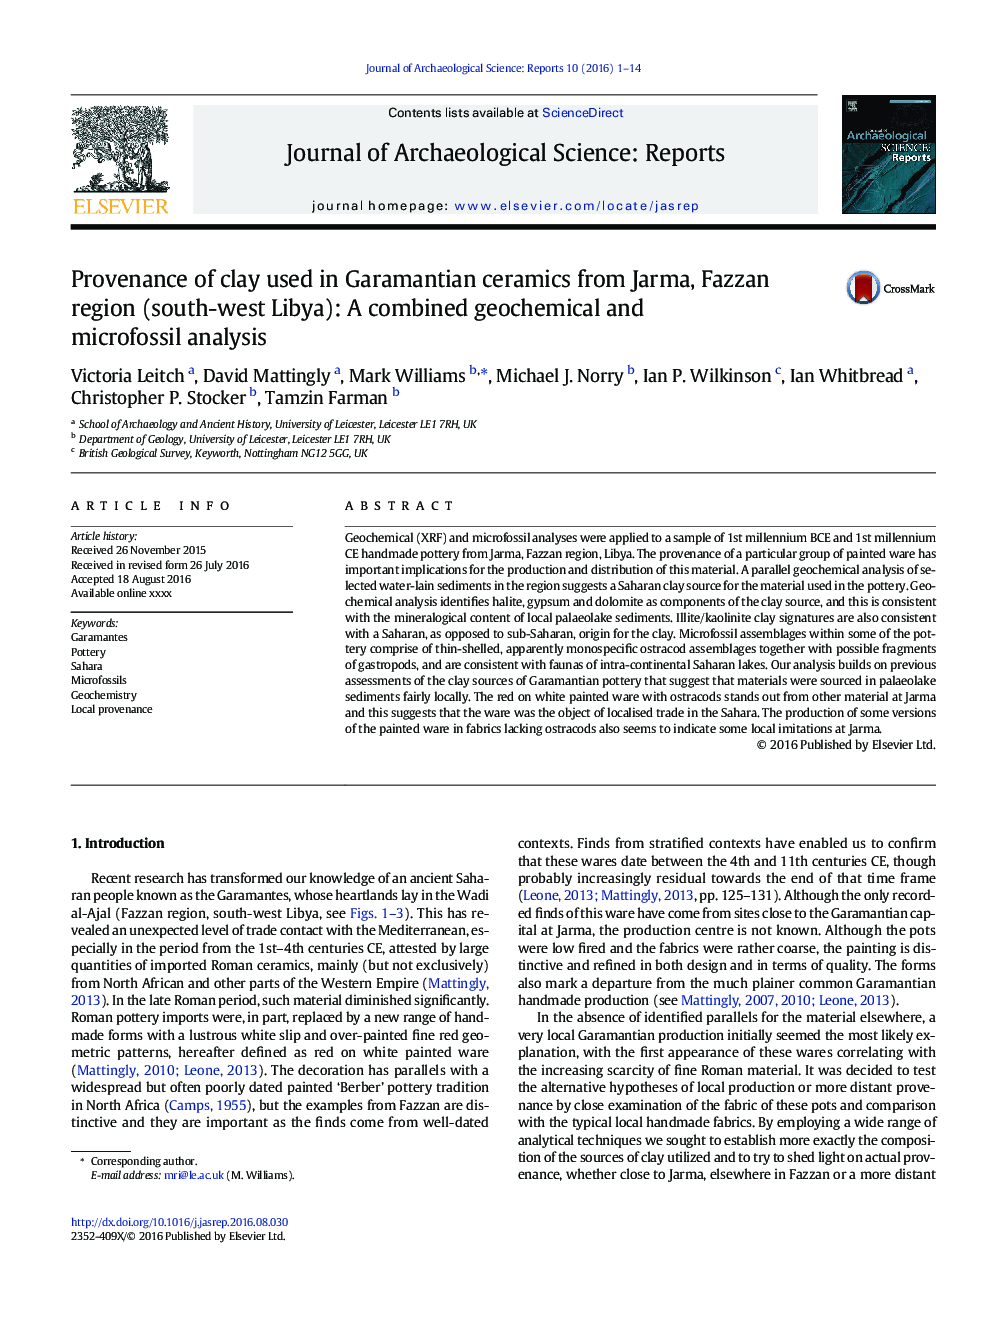 Provenance of clay used in Garamantian ceramics from Jarma, Fazzan region (south-west Libya): A combined geochemical and microfossil analysis